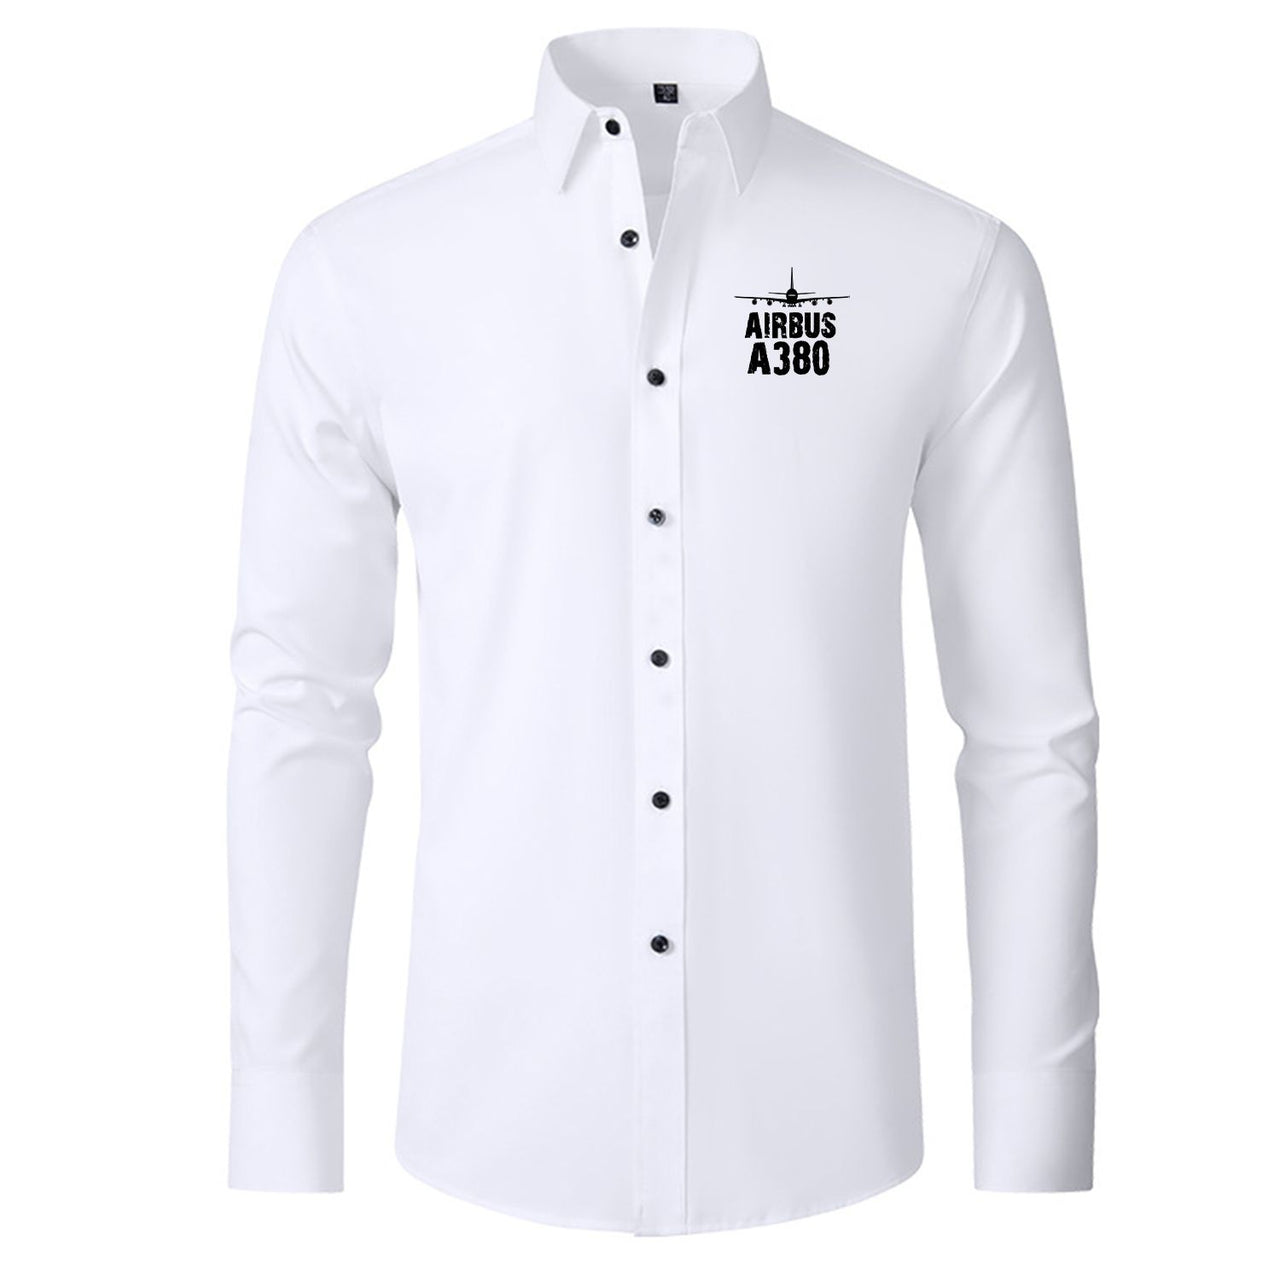 Airbus A380 & Plane Designed Long Sleeve Shirts